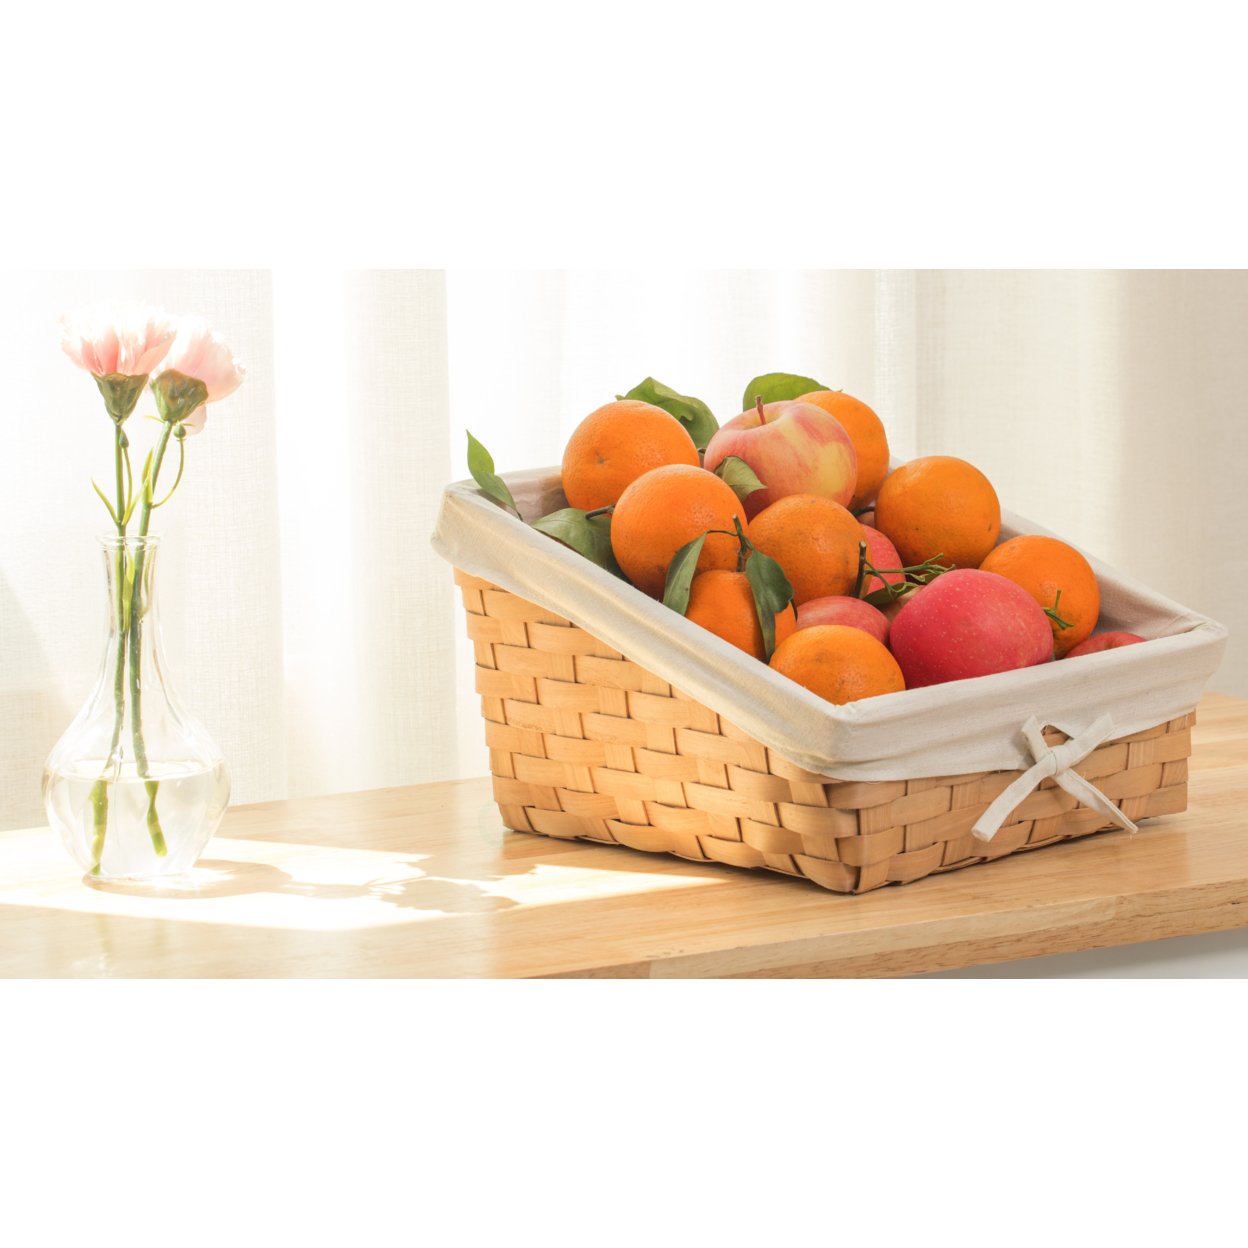 Wooden Angled Display Basket with Fabric Liner for Storage and Display